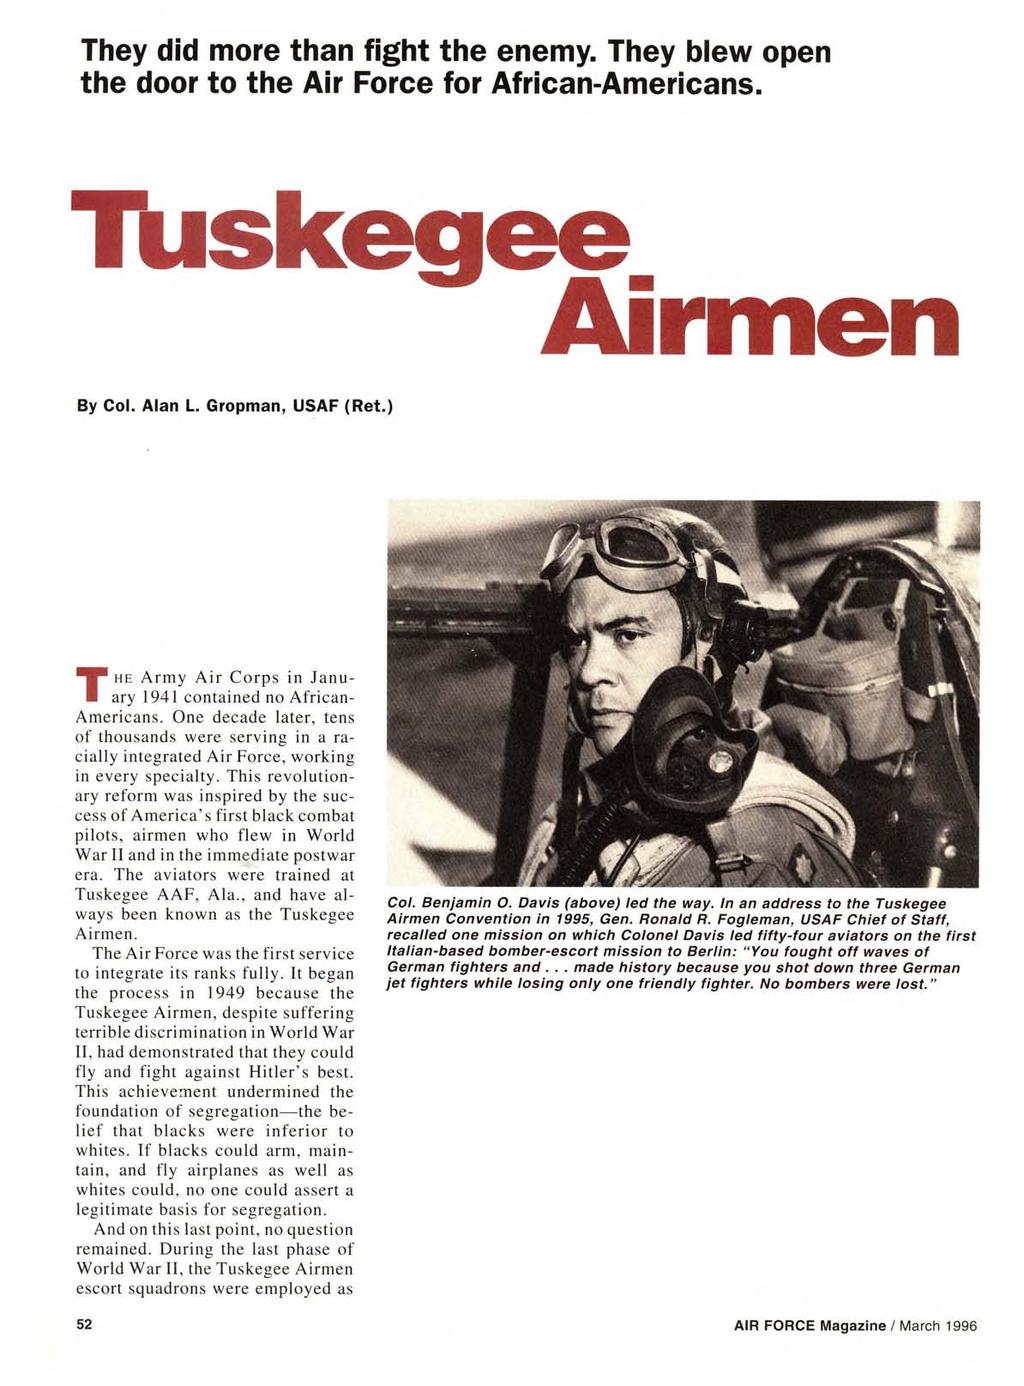 They did more than fight the enemy. They blew open the door to the Air Force for African-Americans. Tuskegee Airmen By Col. Alan L. Gropman, USAF (Ret.